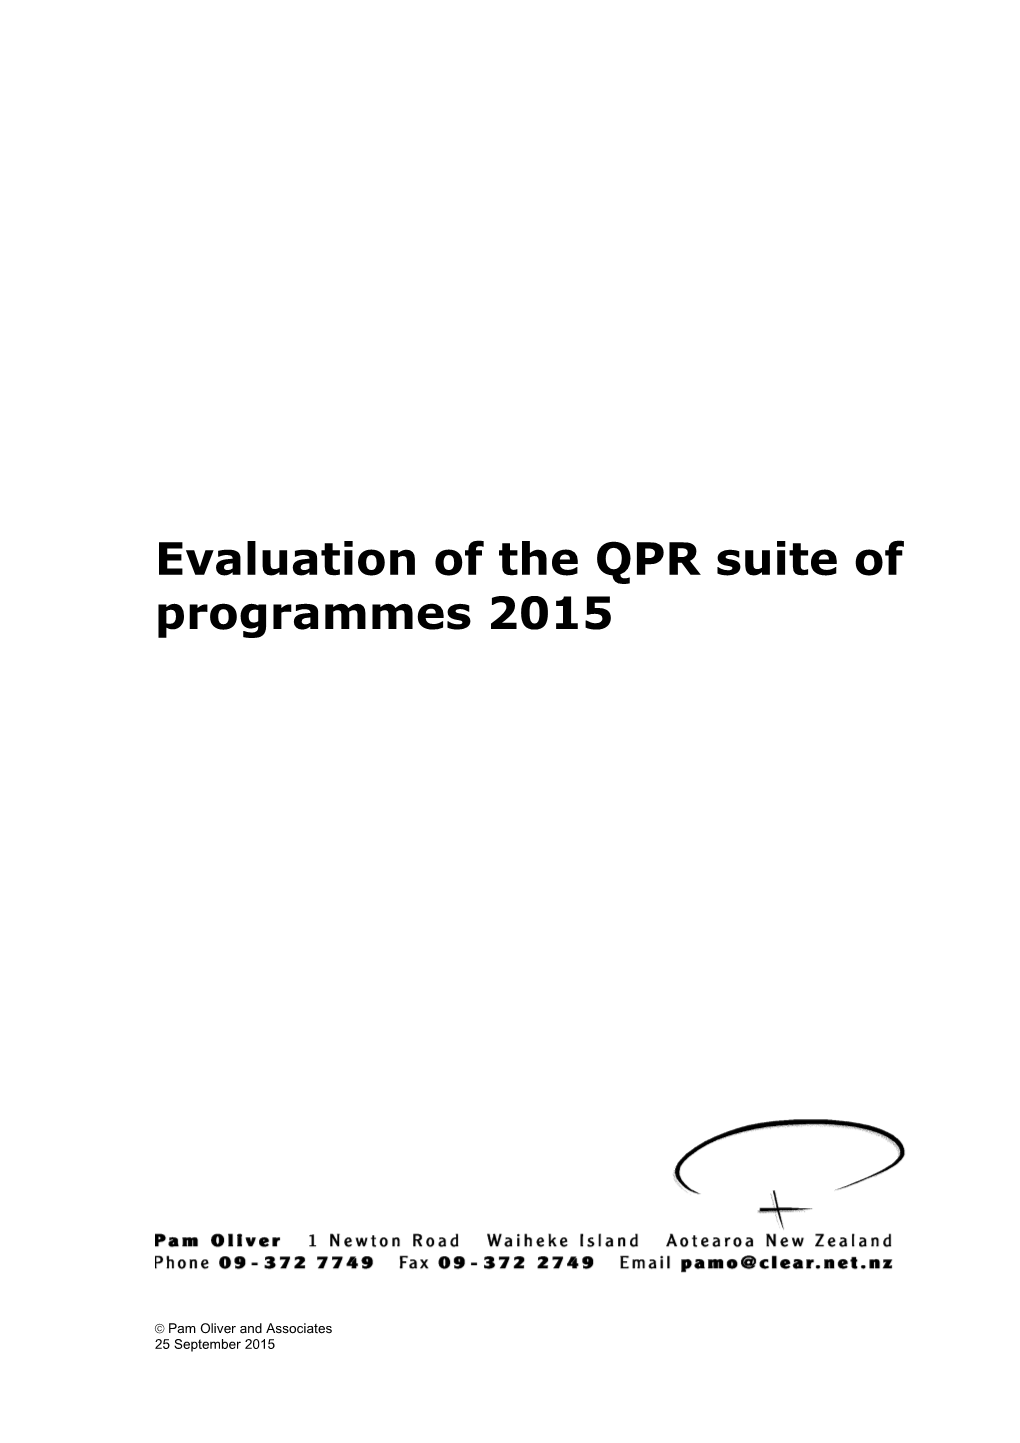 Evaluation of the QPR Suite of Programmes 2015